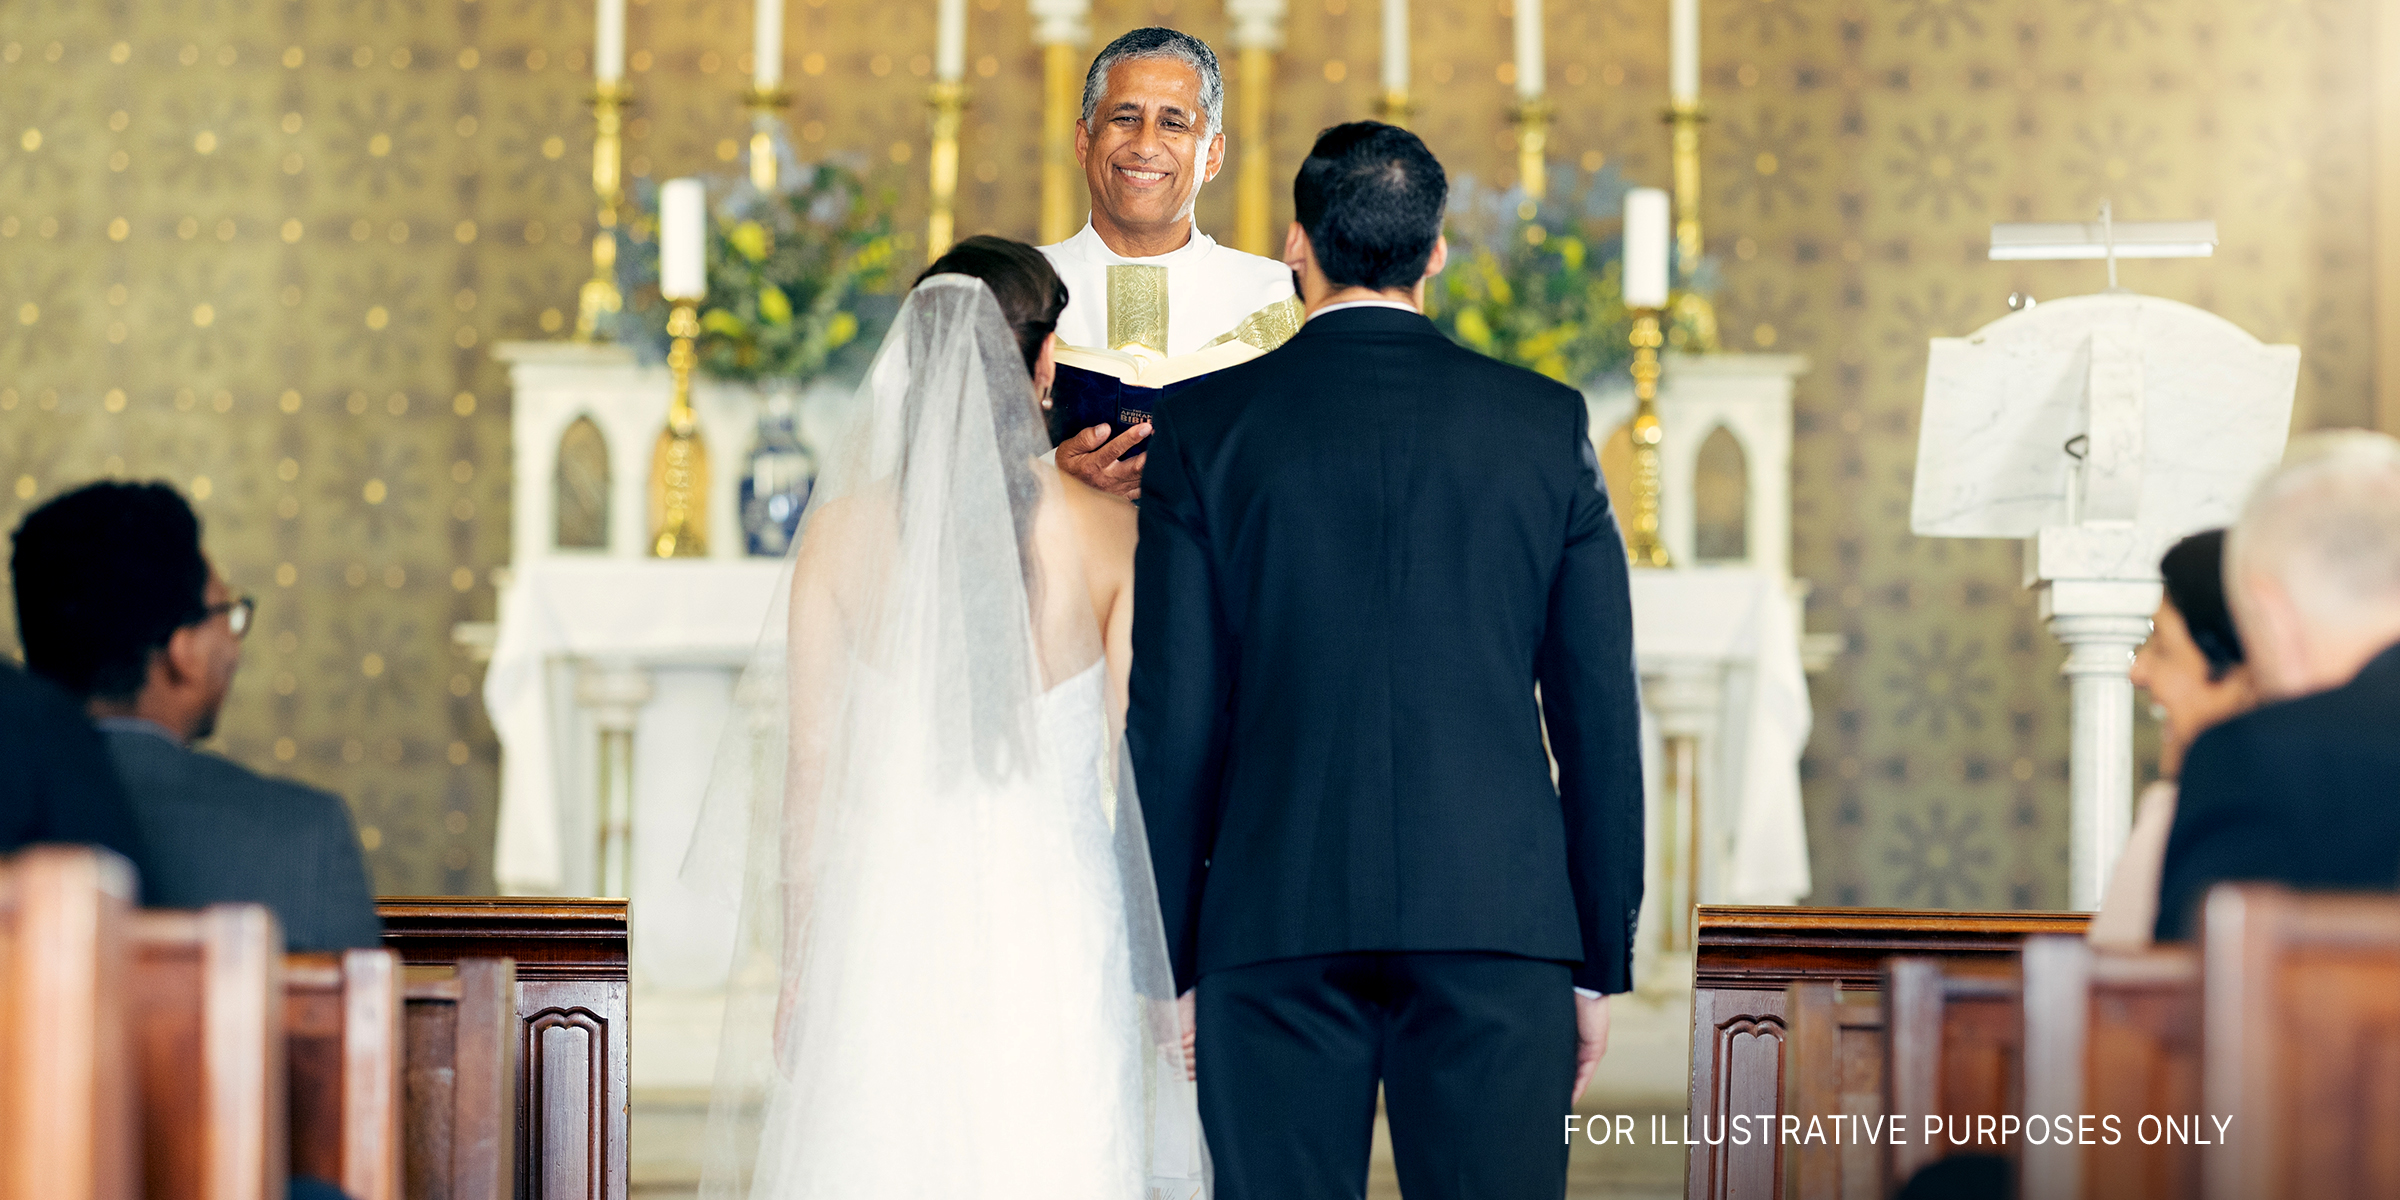 Couple standing before priest in chapel | Source: Shutterstock